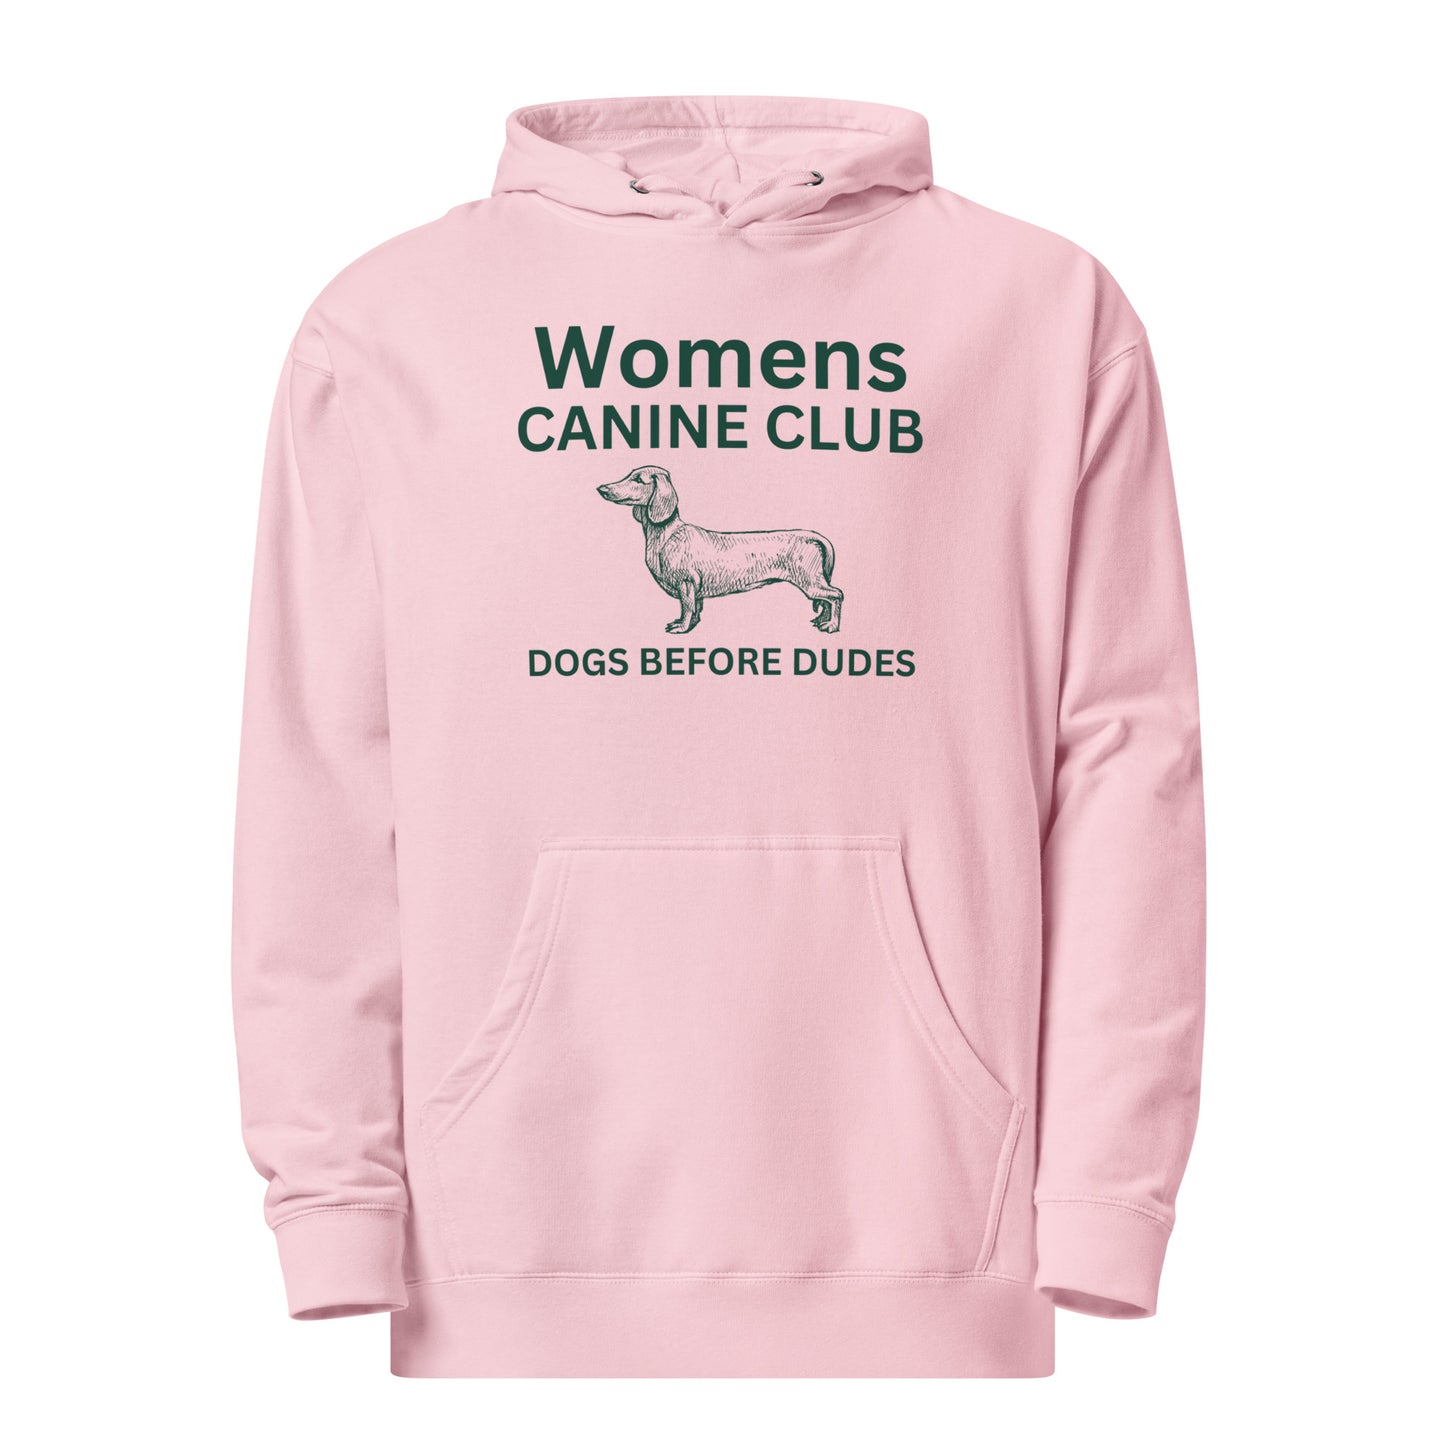 Canine Club Unisex midweight hoodie